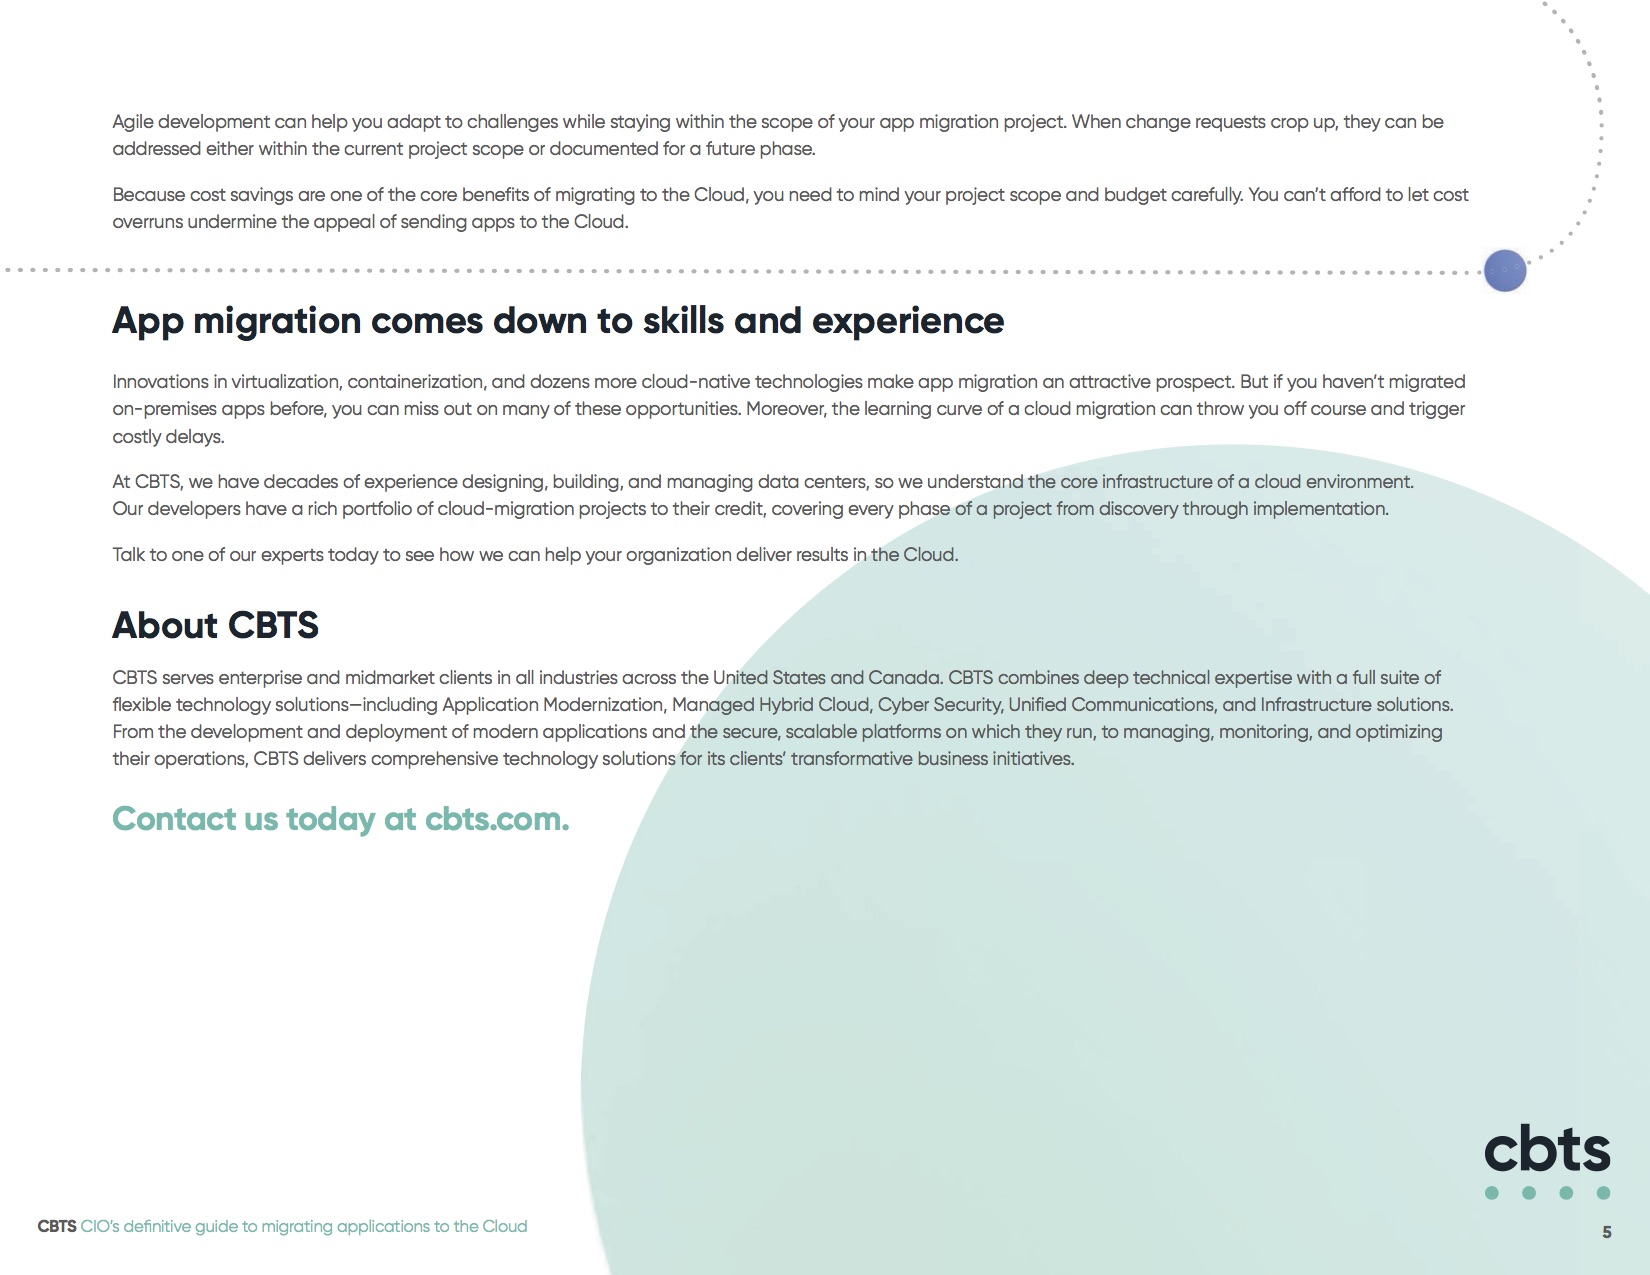 CIOs_Guide_Migrating_Applications_pg05